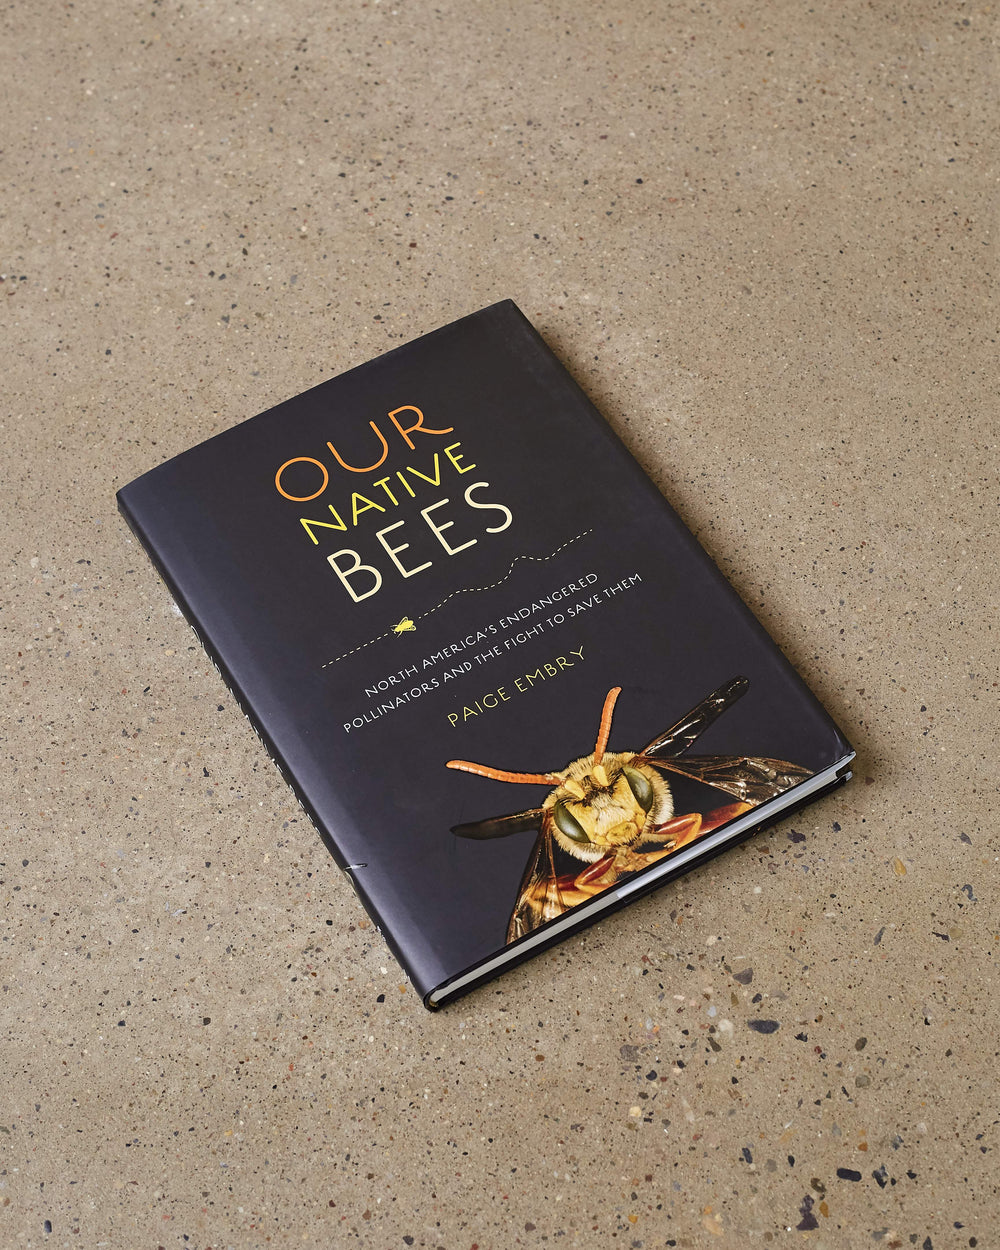 Our Native Bees - North America's Endangered Pollinators and the Fight to Save Them